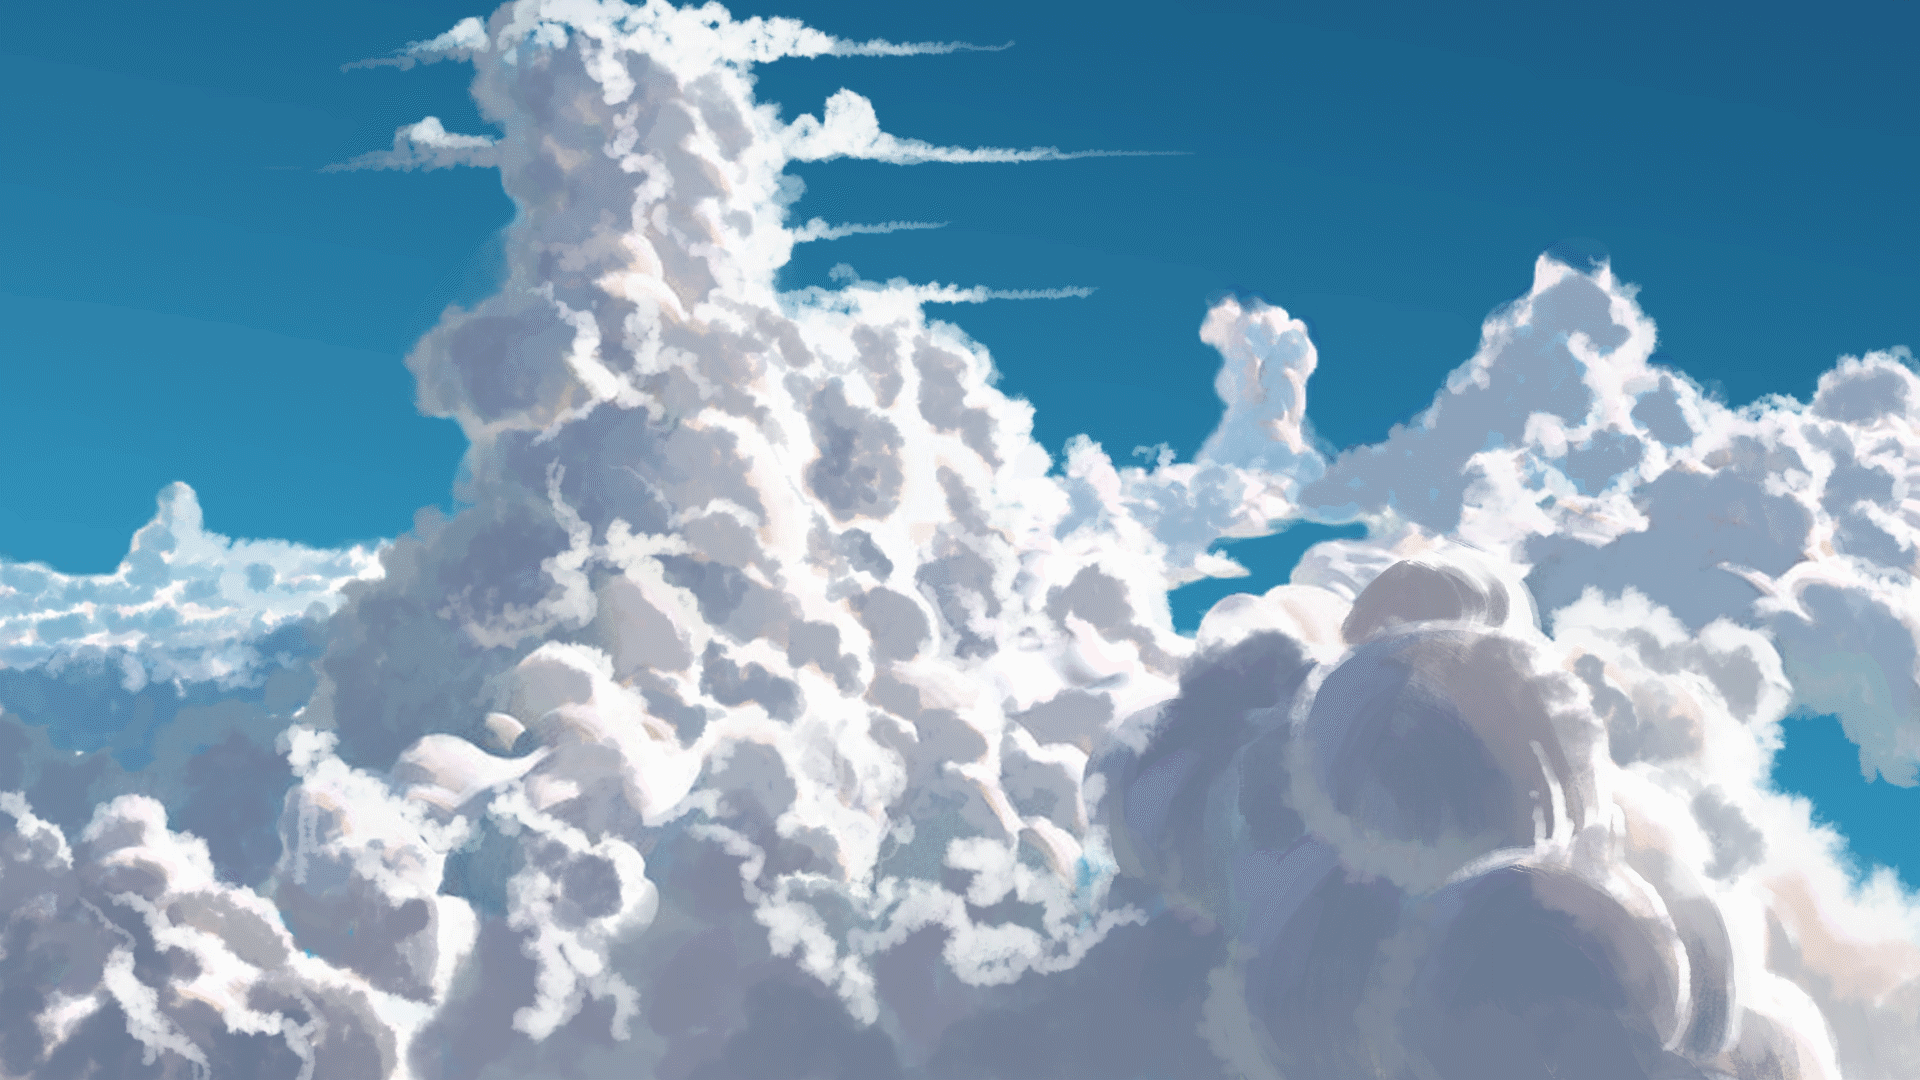 clouds wolken nuages fond background gif anime animated animation effect  pink sky ciel himmel heaven cloud wolke nuage tube clouds  wolken   nuages  fond  background  gif  anime 